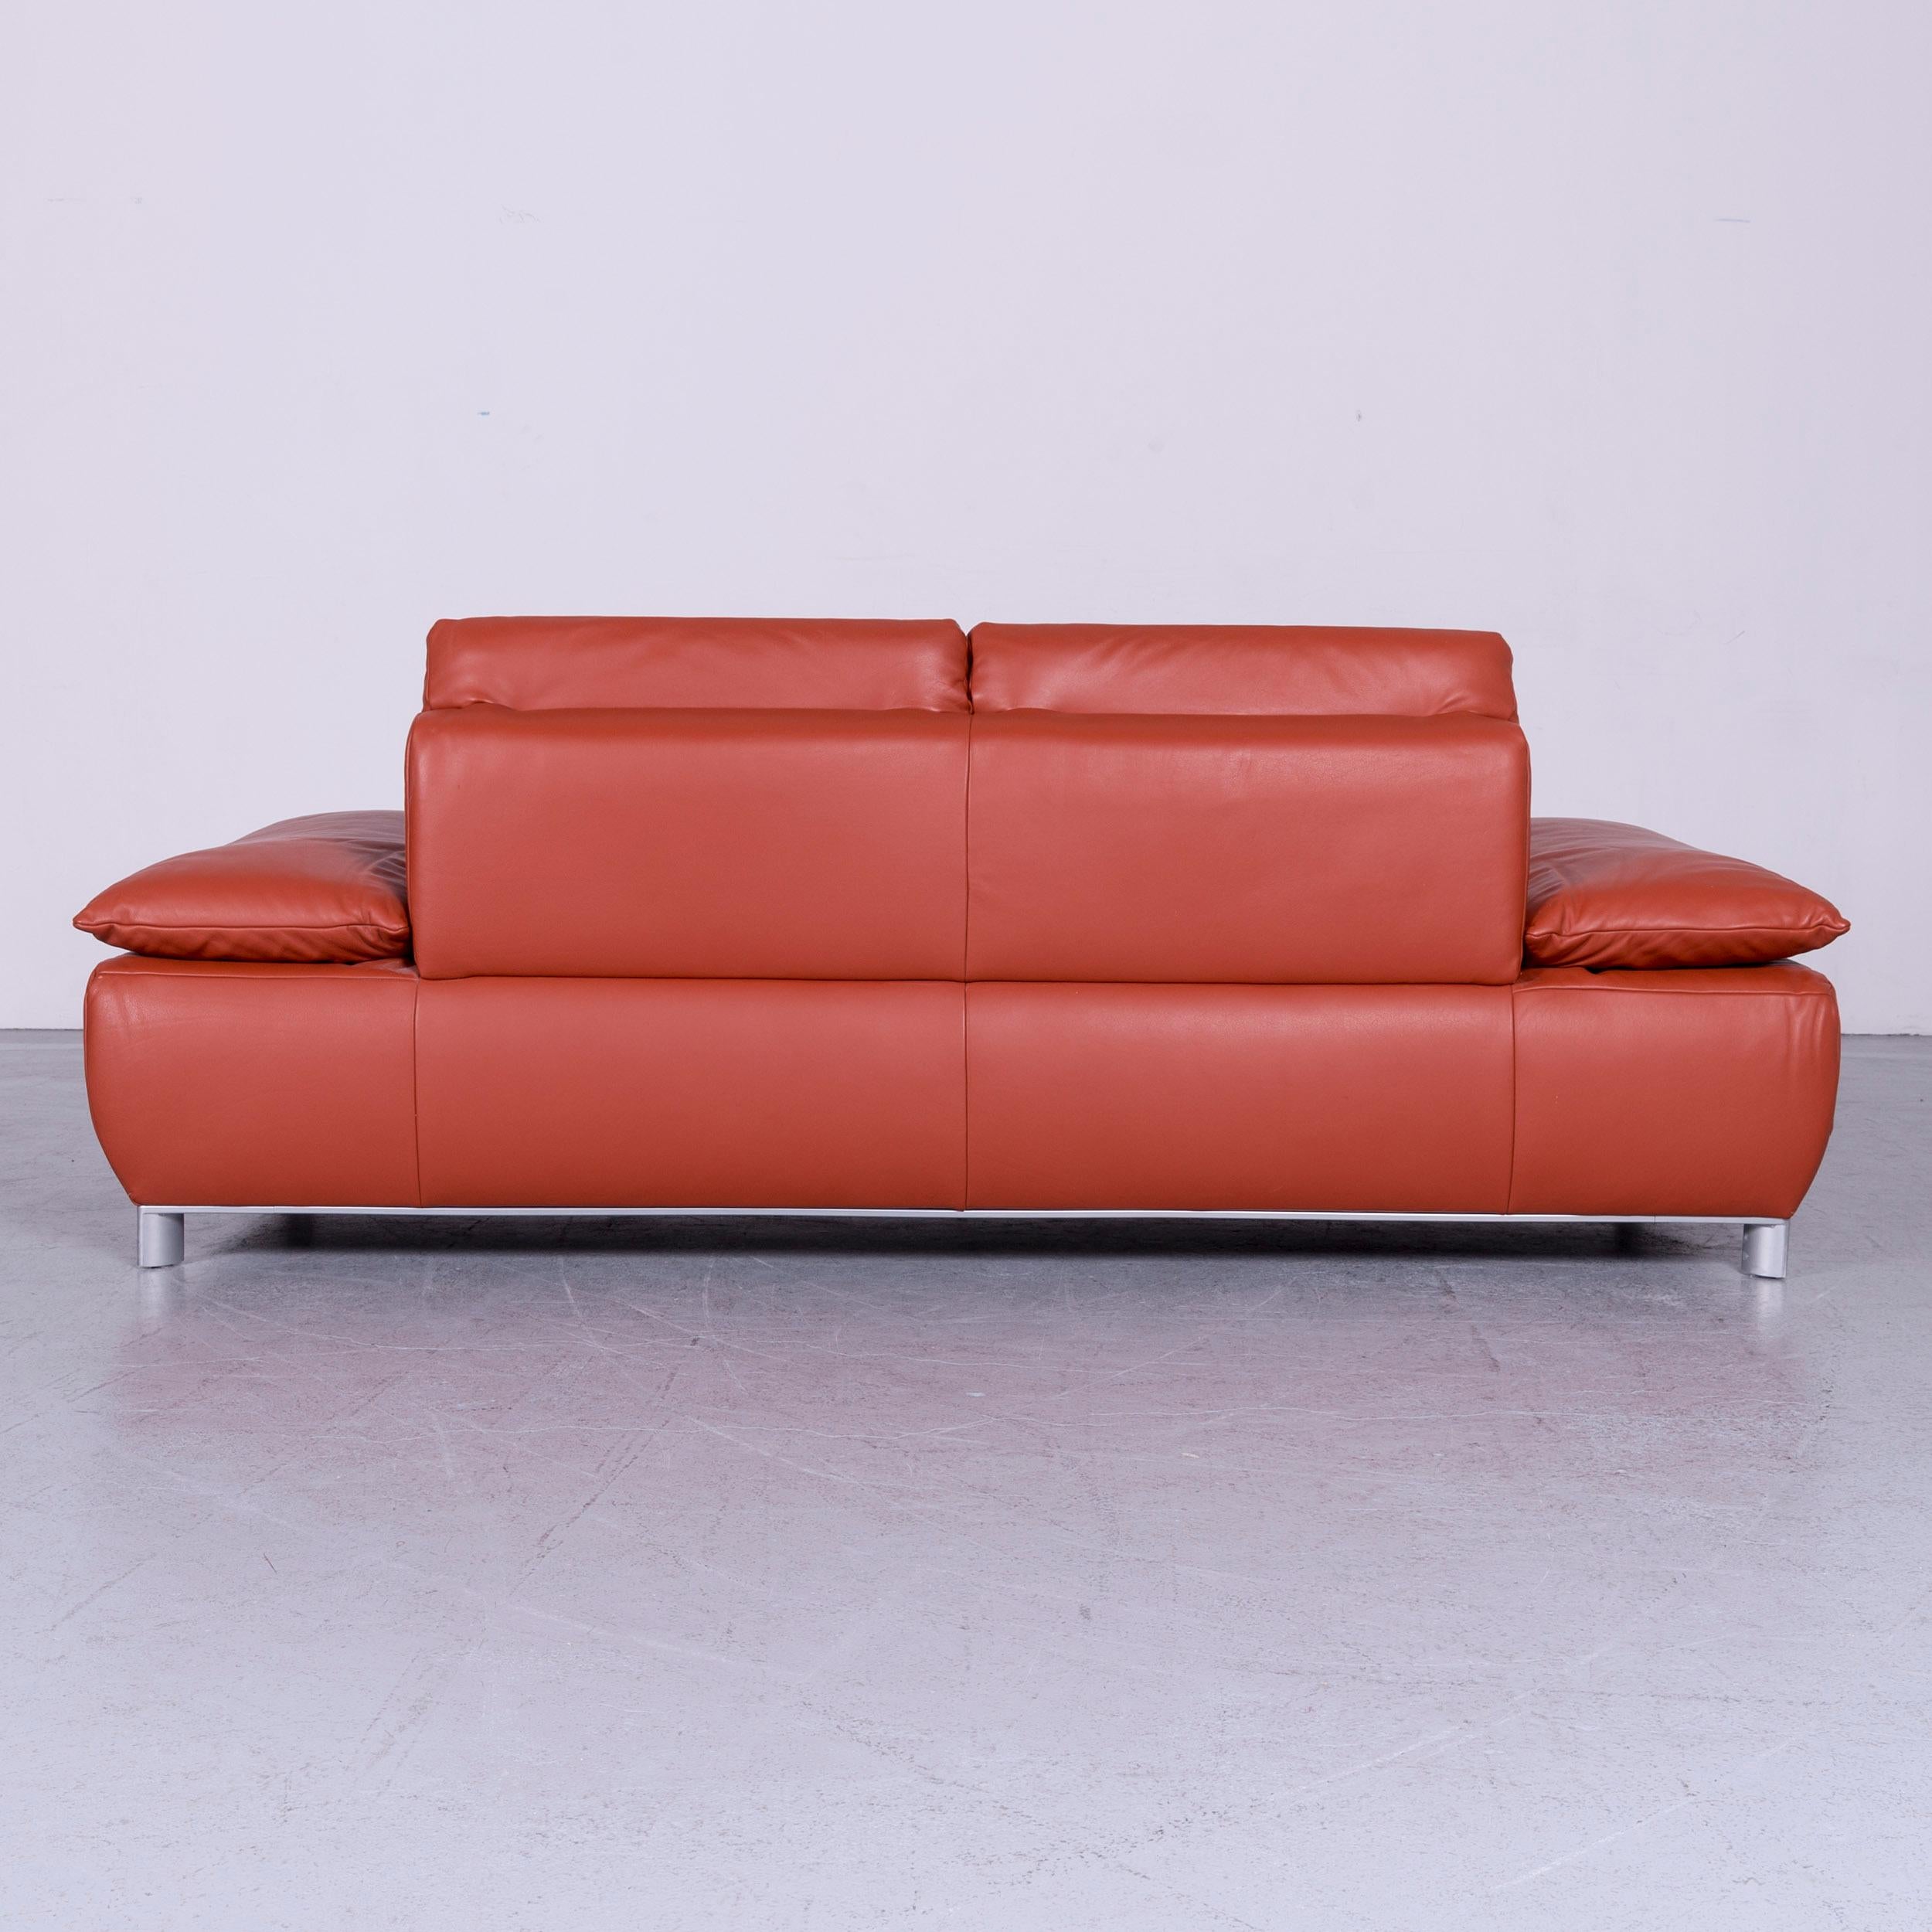 Koinor Volare Designer Leather Sofa Red Three-Seat Couch with Function For Sale 3